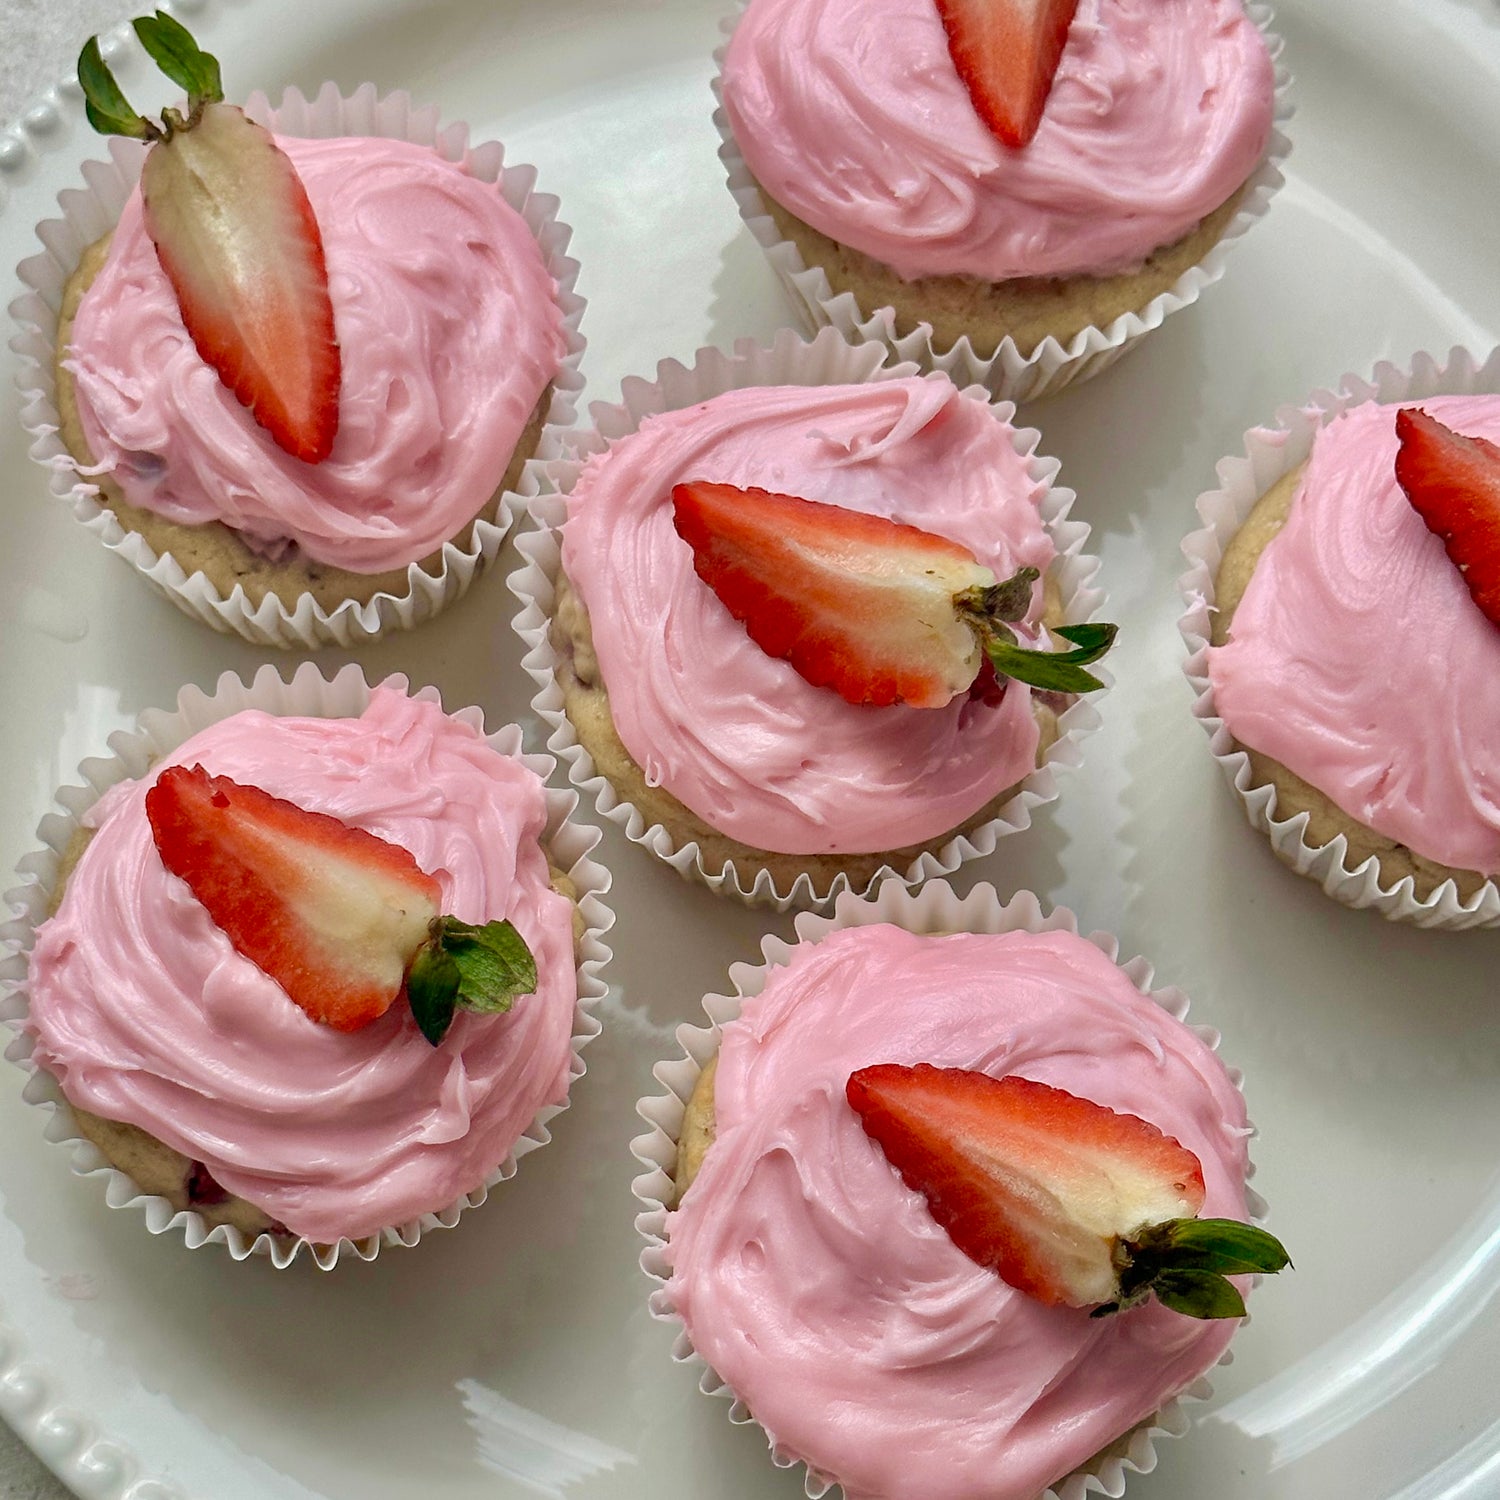 high protein strawberry muffins with fresh strawberries on top